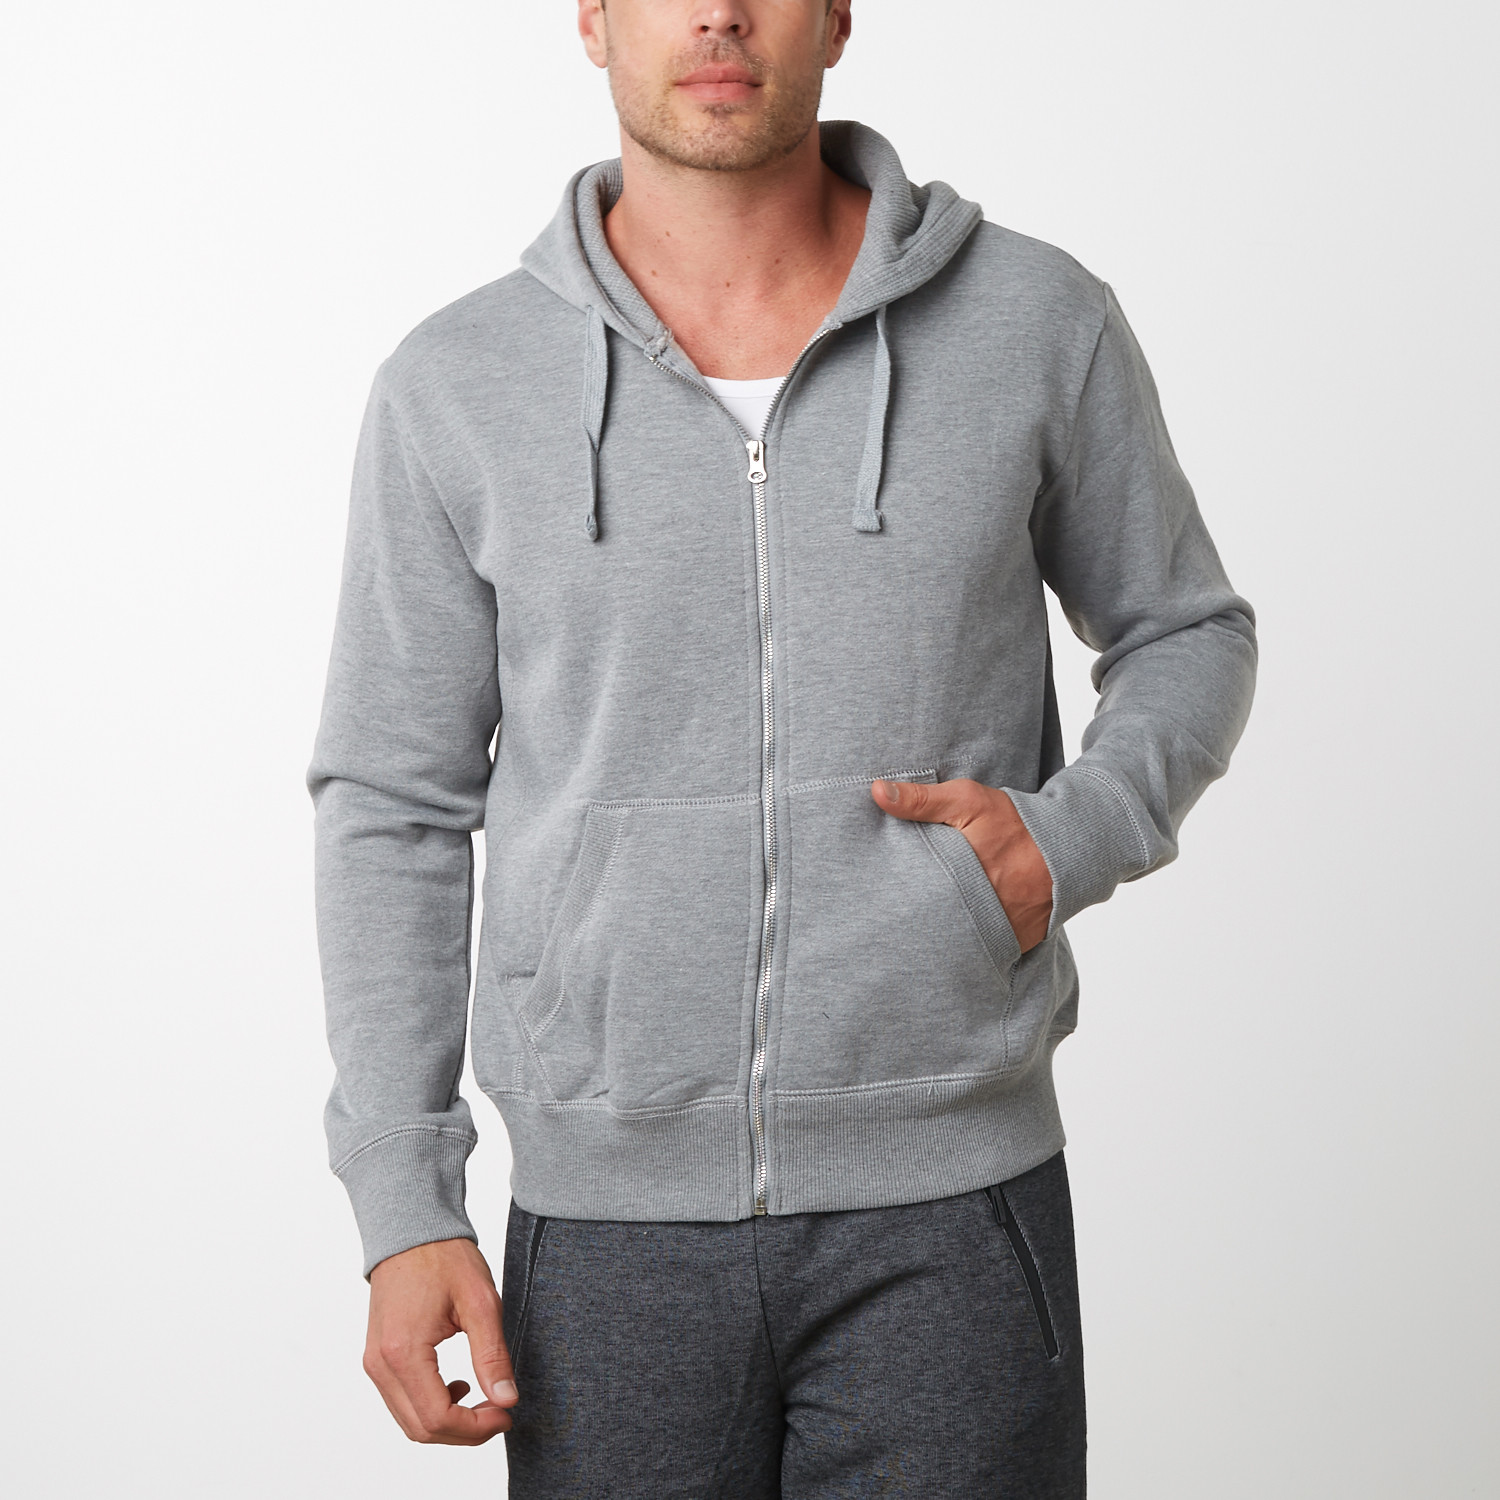 Tech Fleece Thermal Lined Hoodie // Heather Gray (S) - Ethan Williams ...